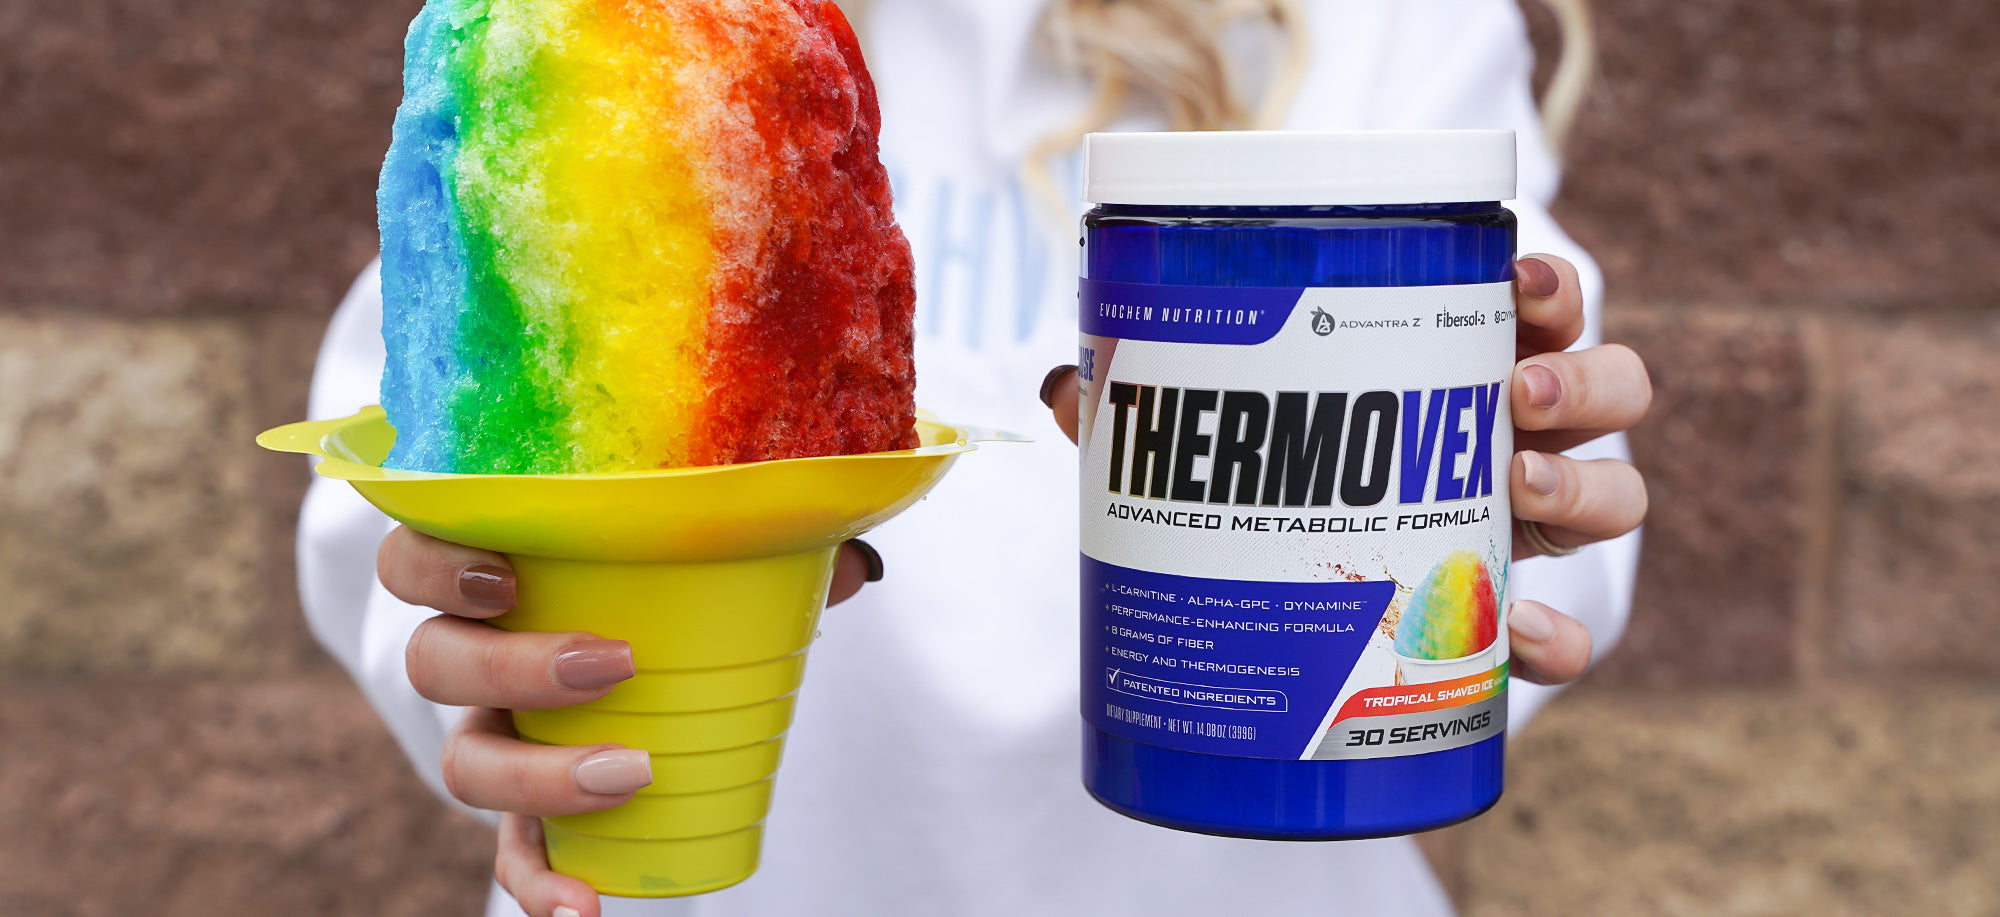 NUTRISHOP® Channels Summer Vibes This Winter with New Flavor